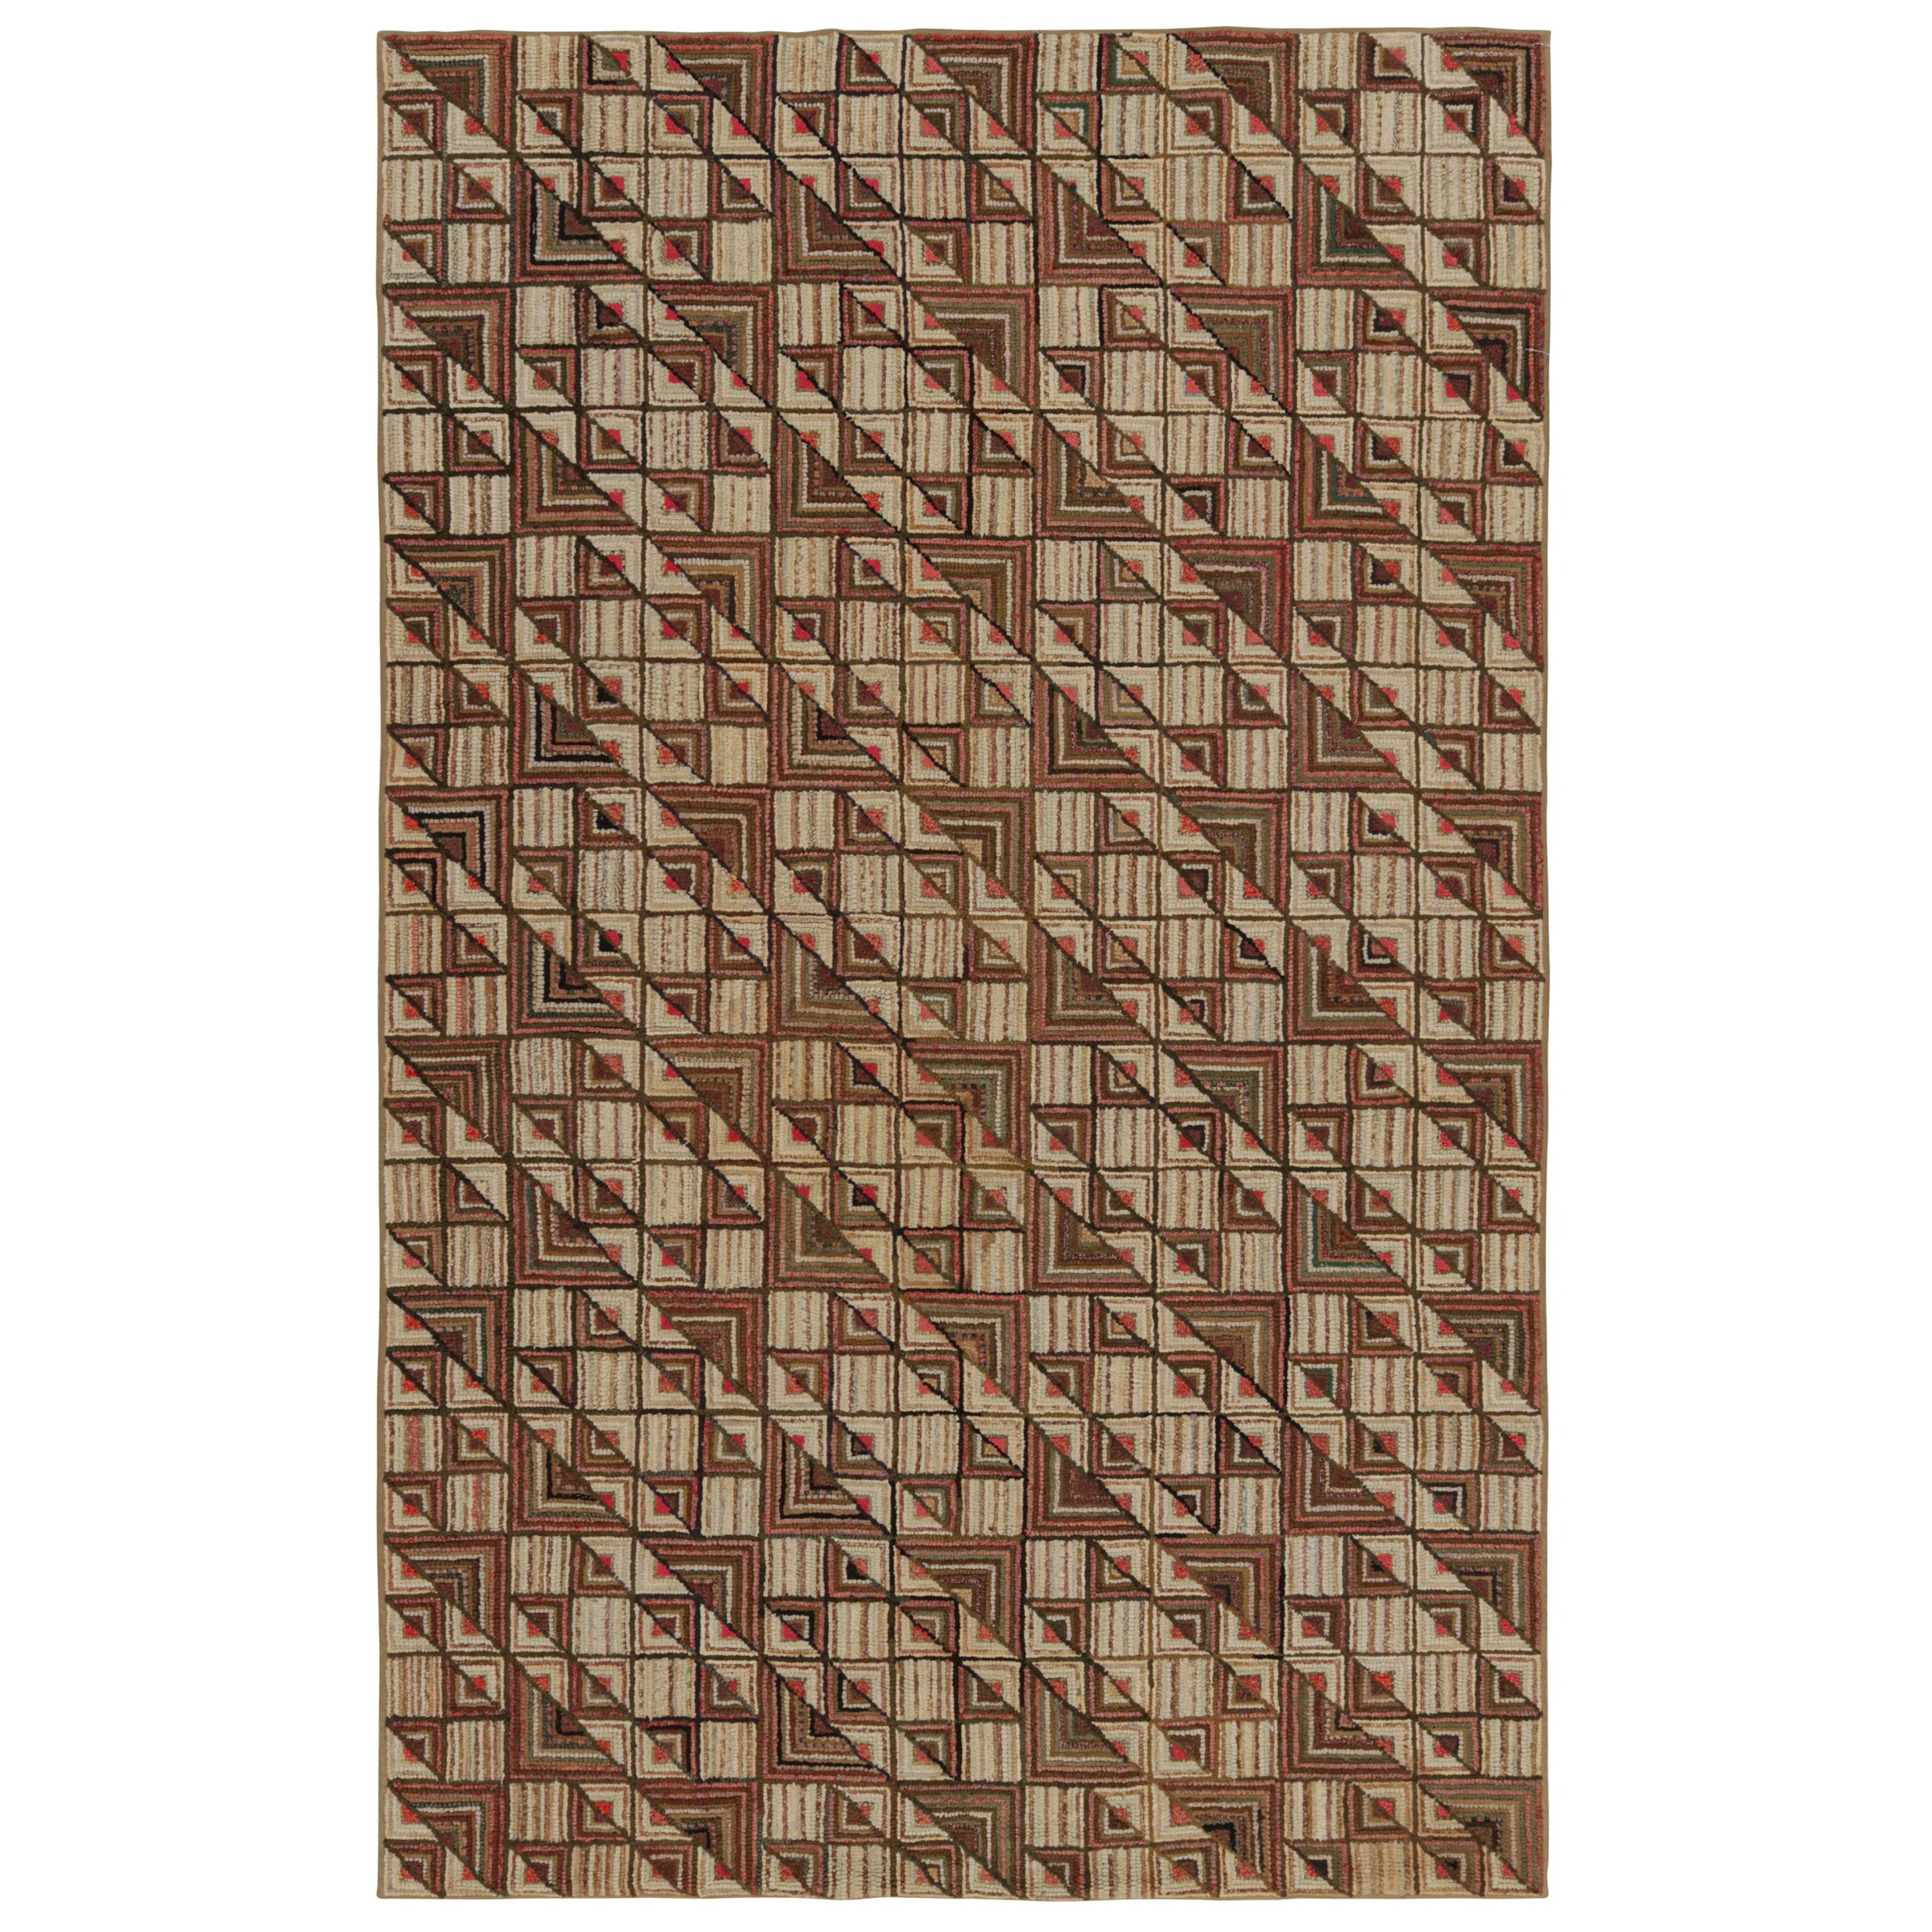 Antique Hooked Rug with Beige-Brown Geometric Patterns, from Rug & Kilim For Sale